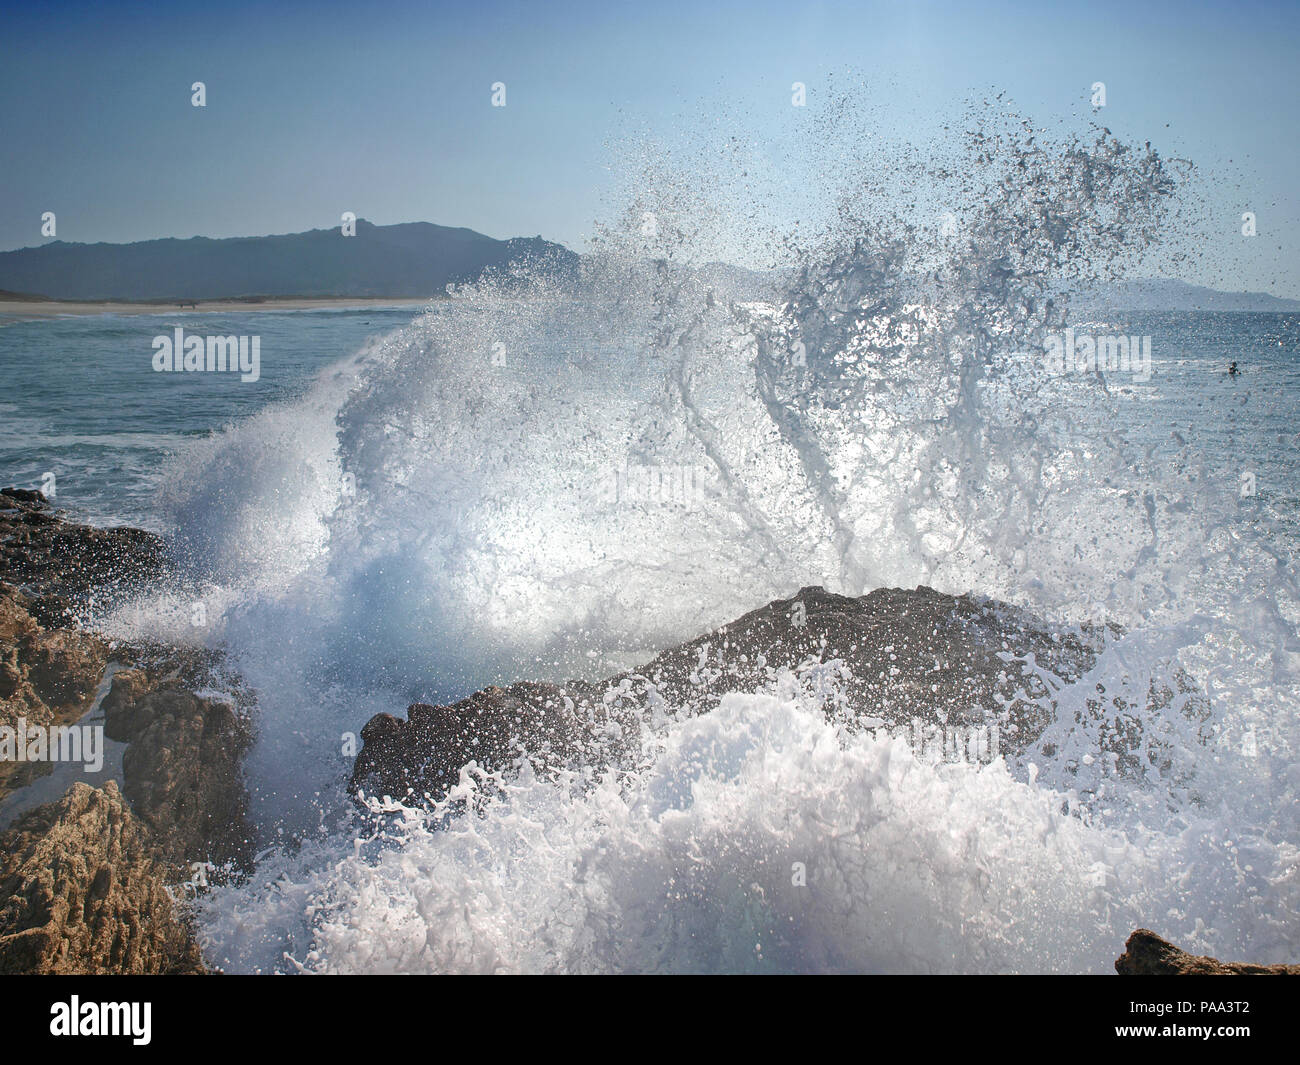 Surf waves breaking over rocks on the coast of Galicia, Spain Stock Photo